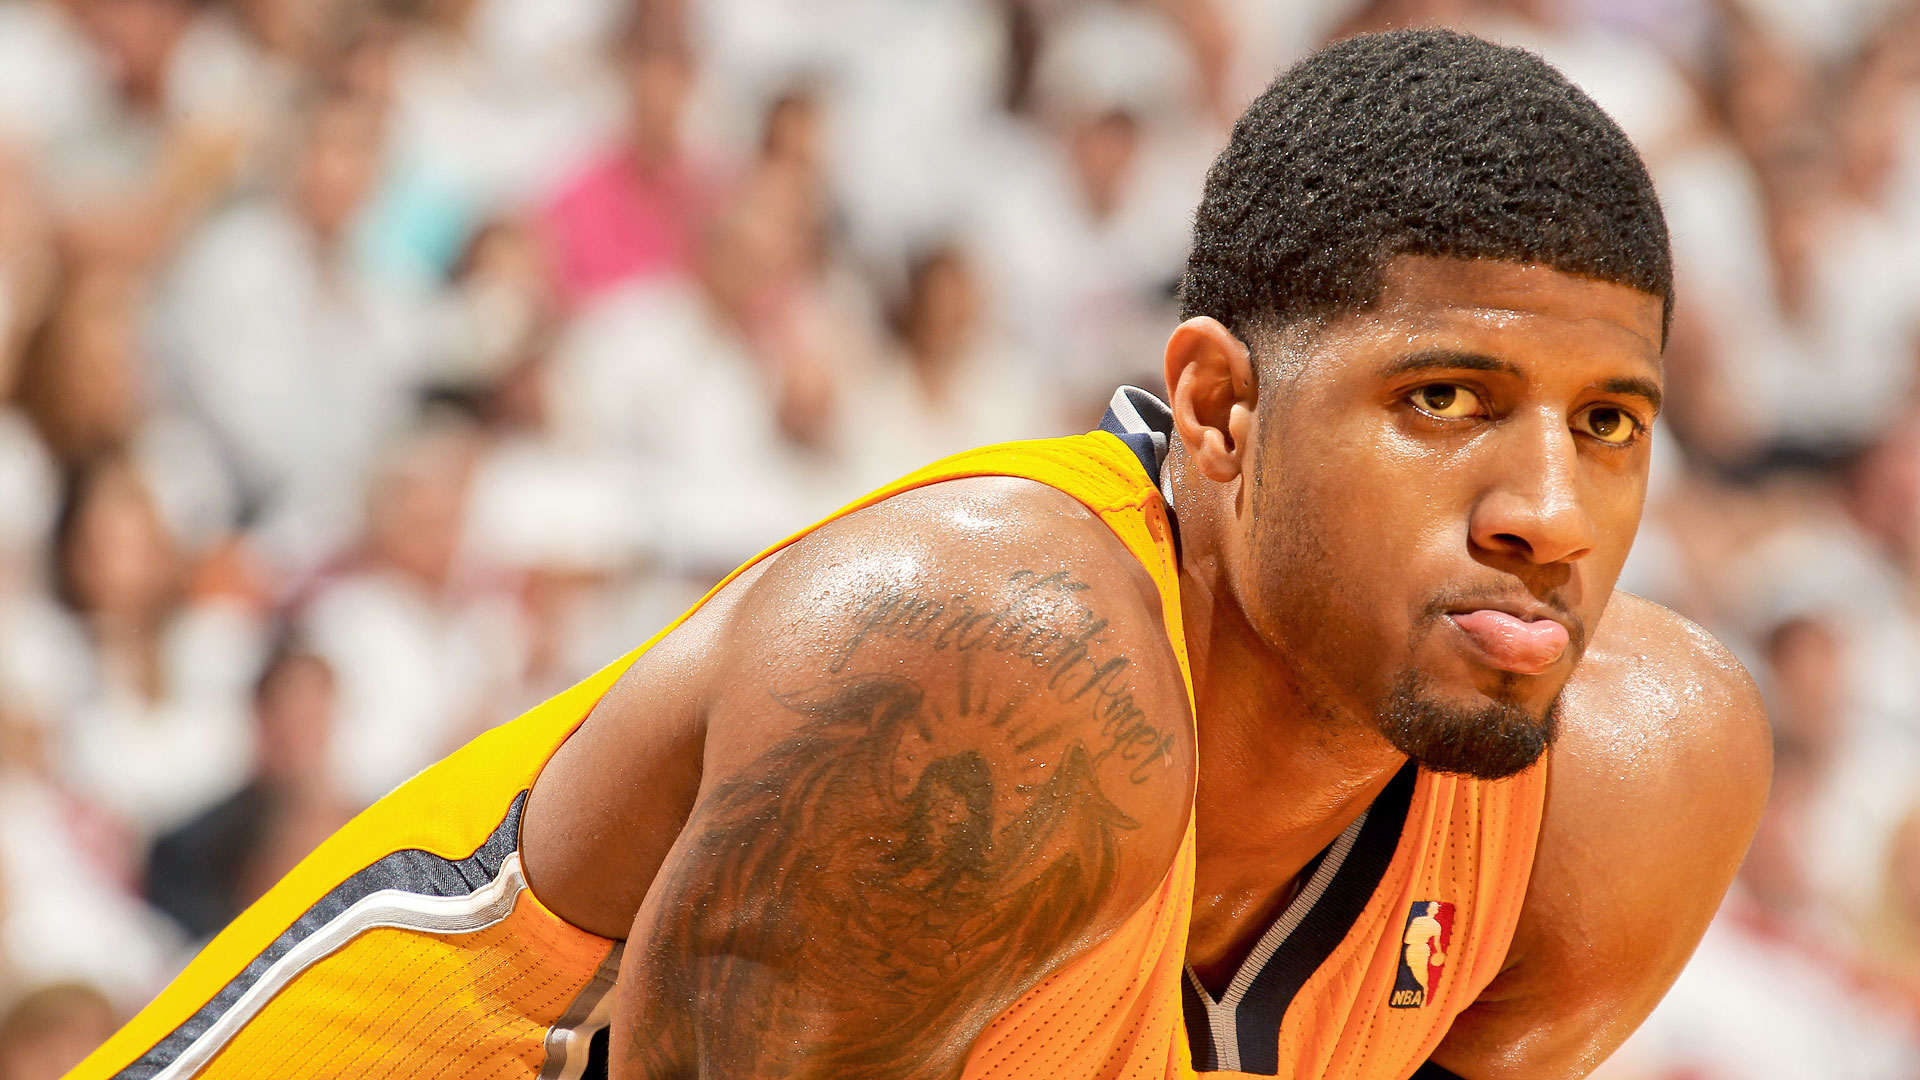 Paul George fined $35,000 for criticism of officiating